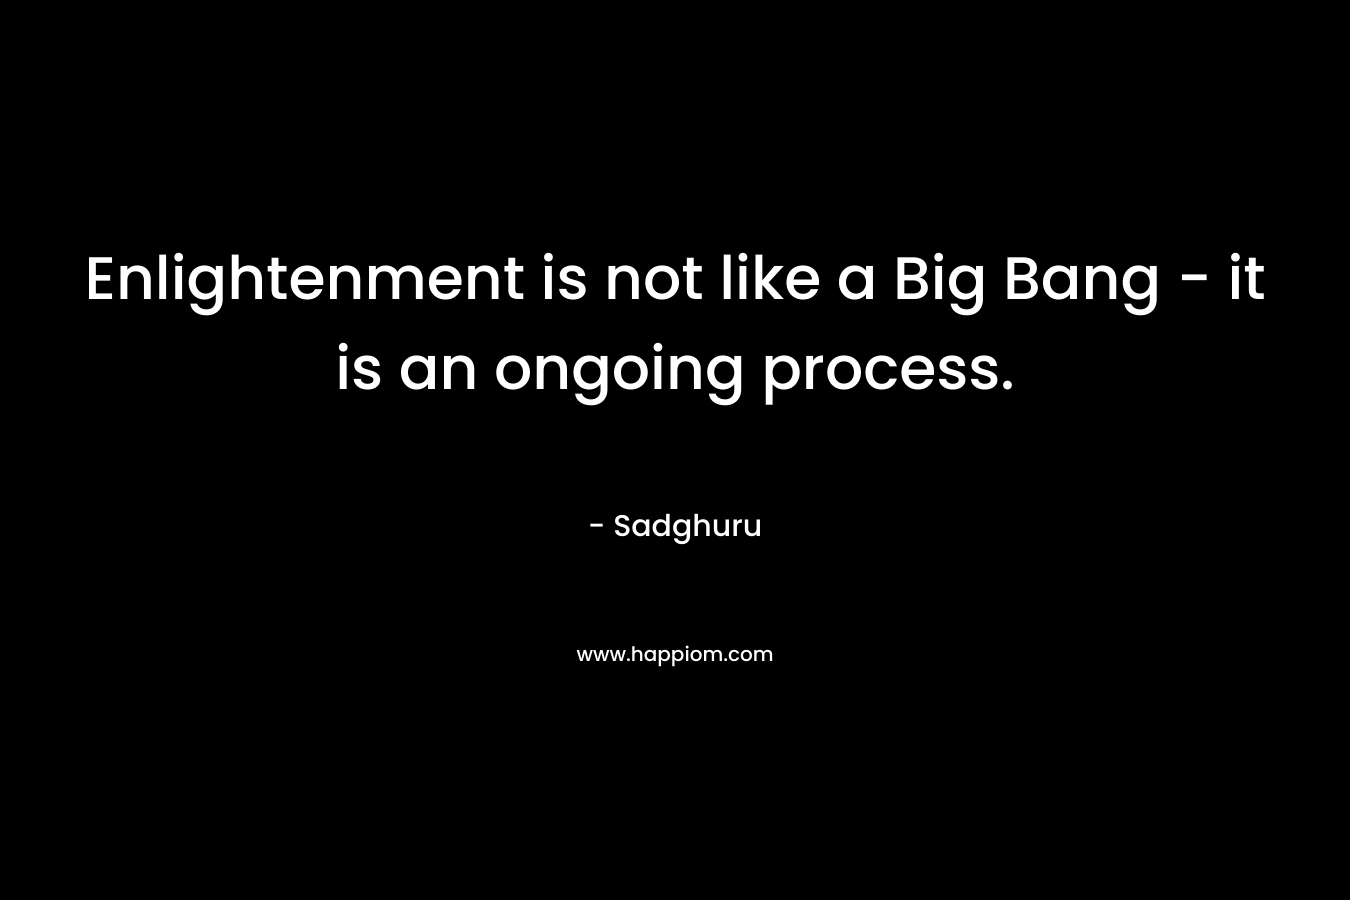 Enlightenment is not like a Big Bang - it is an ongoing process.